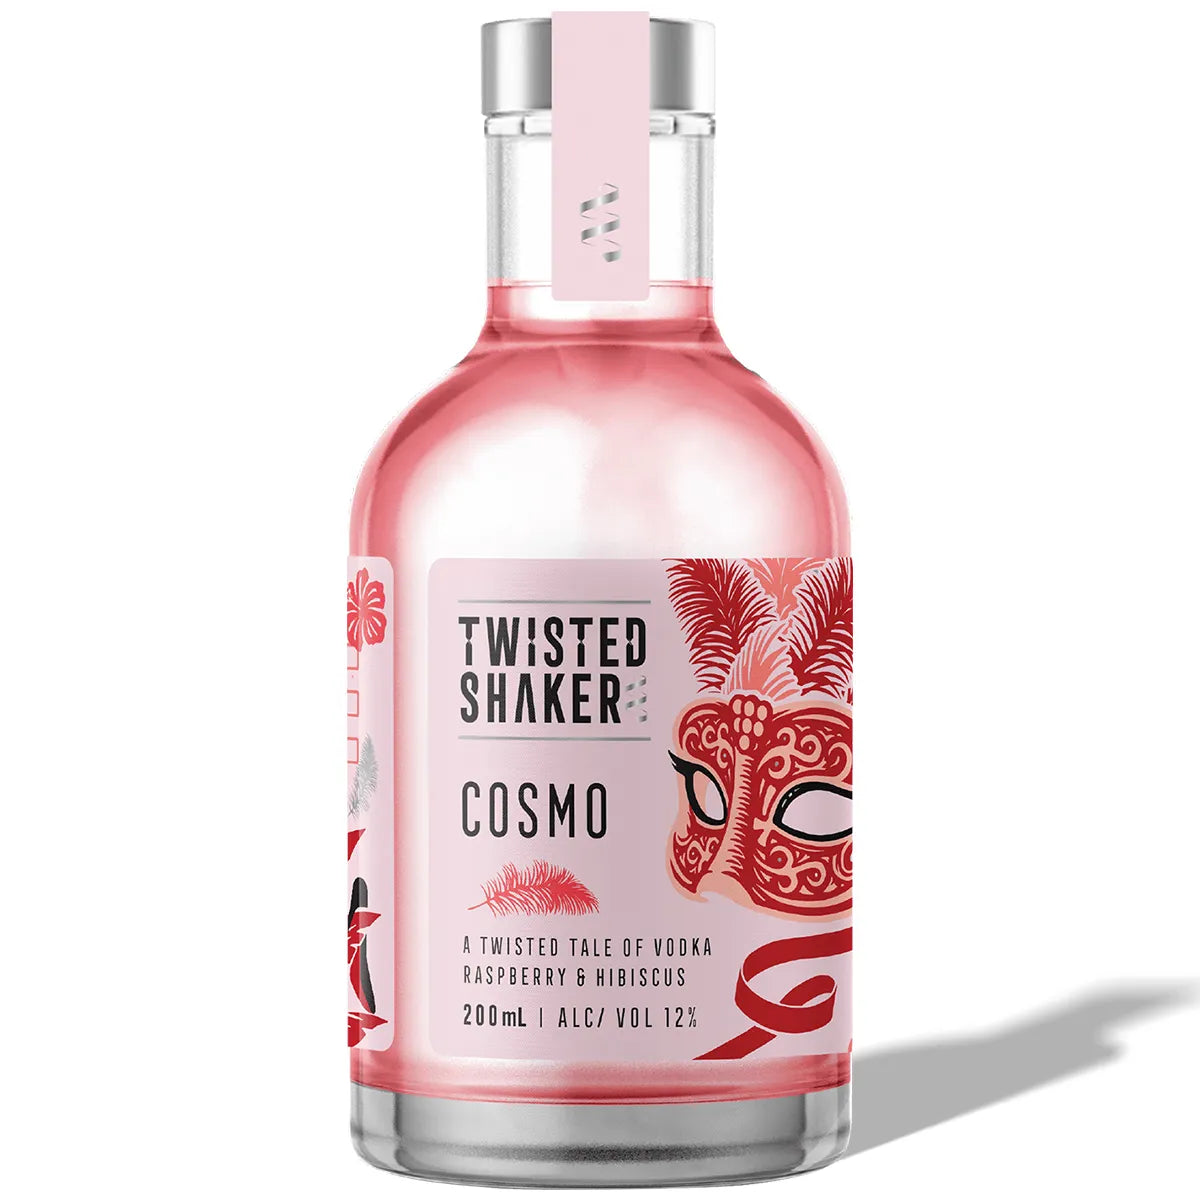 Twisted Shaker Cosmo Raspberry Hibiscus Cocktail 200ml Single Bottle